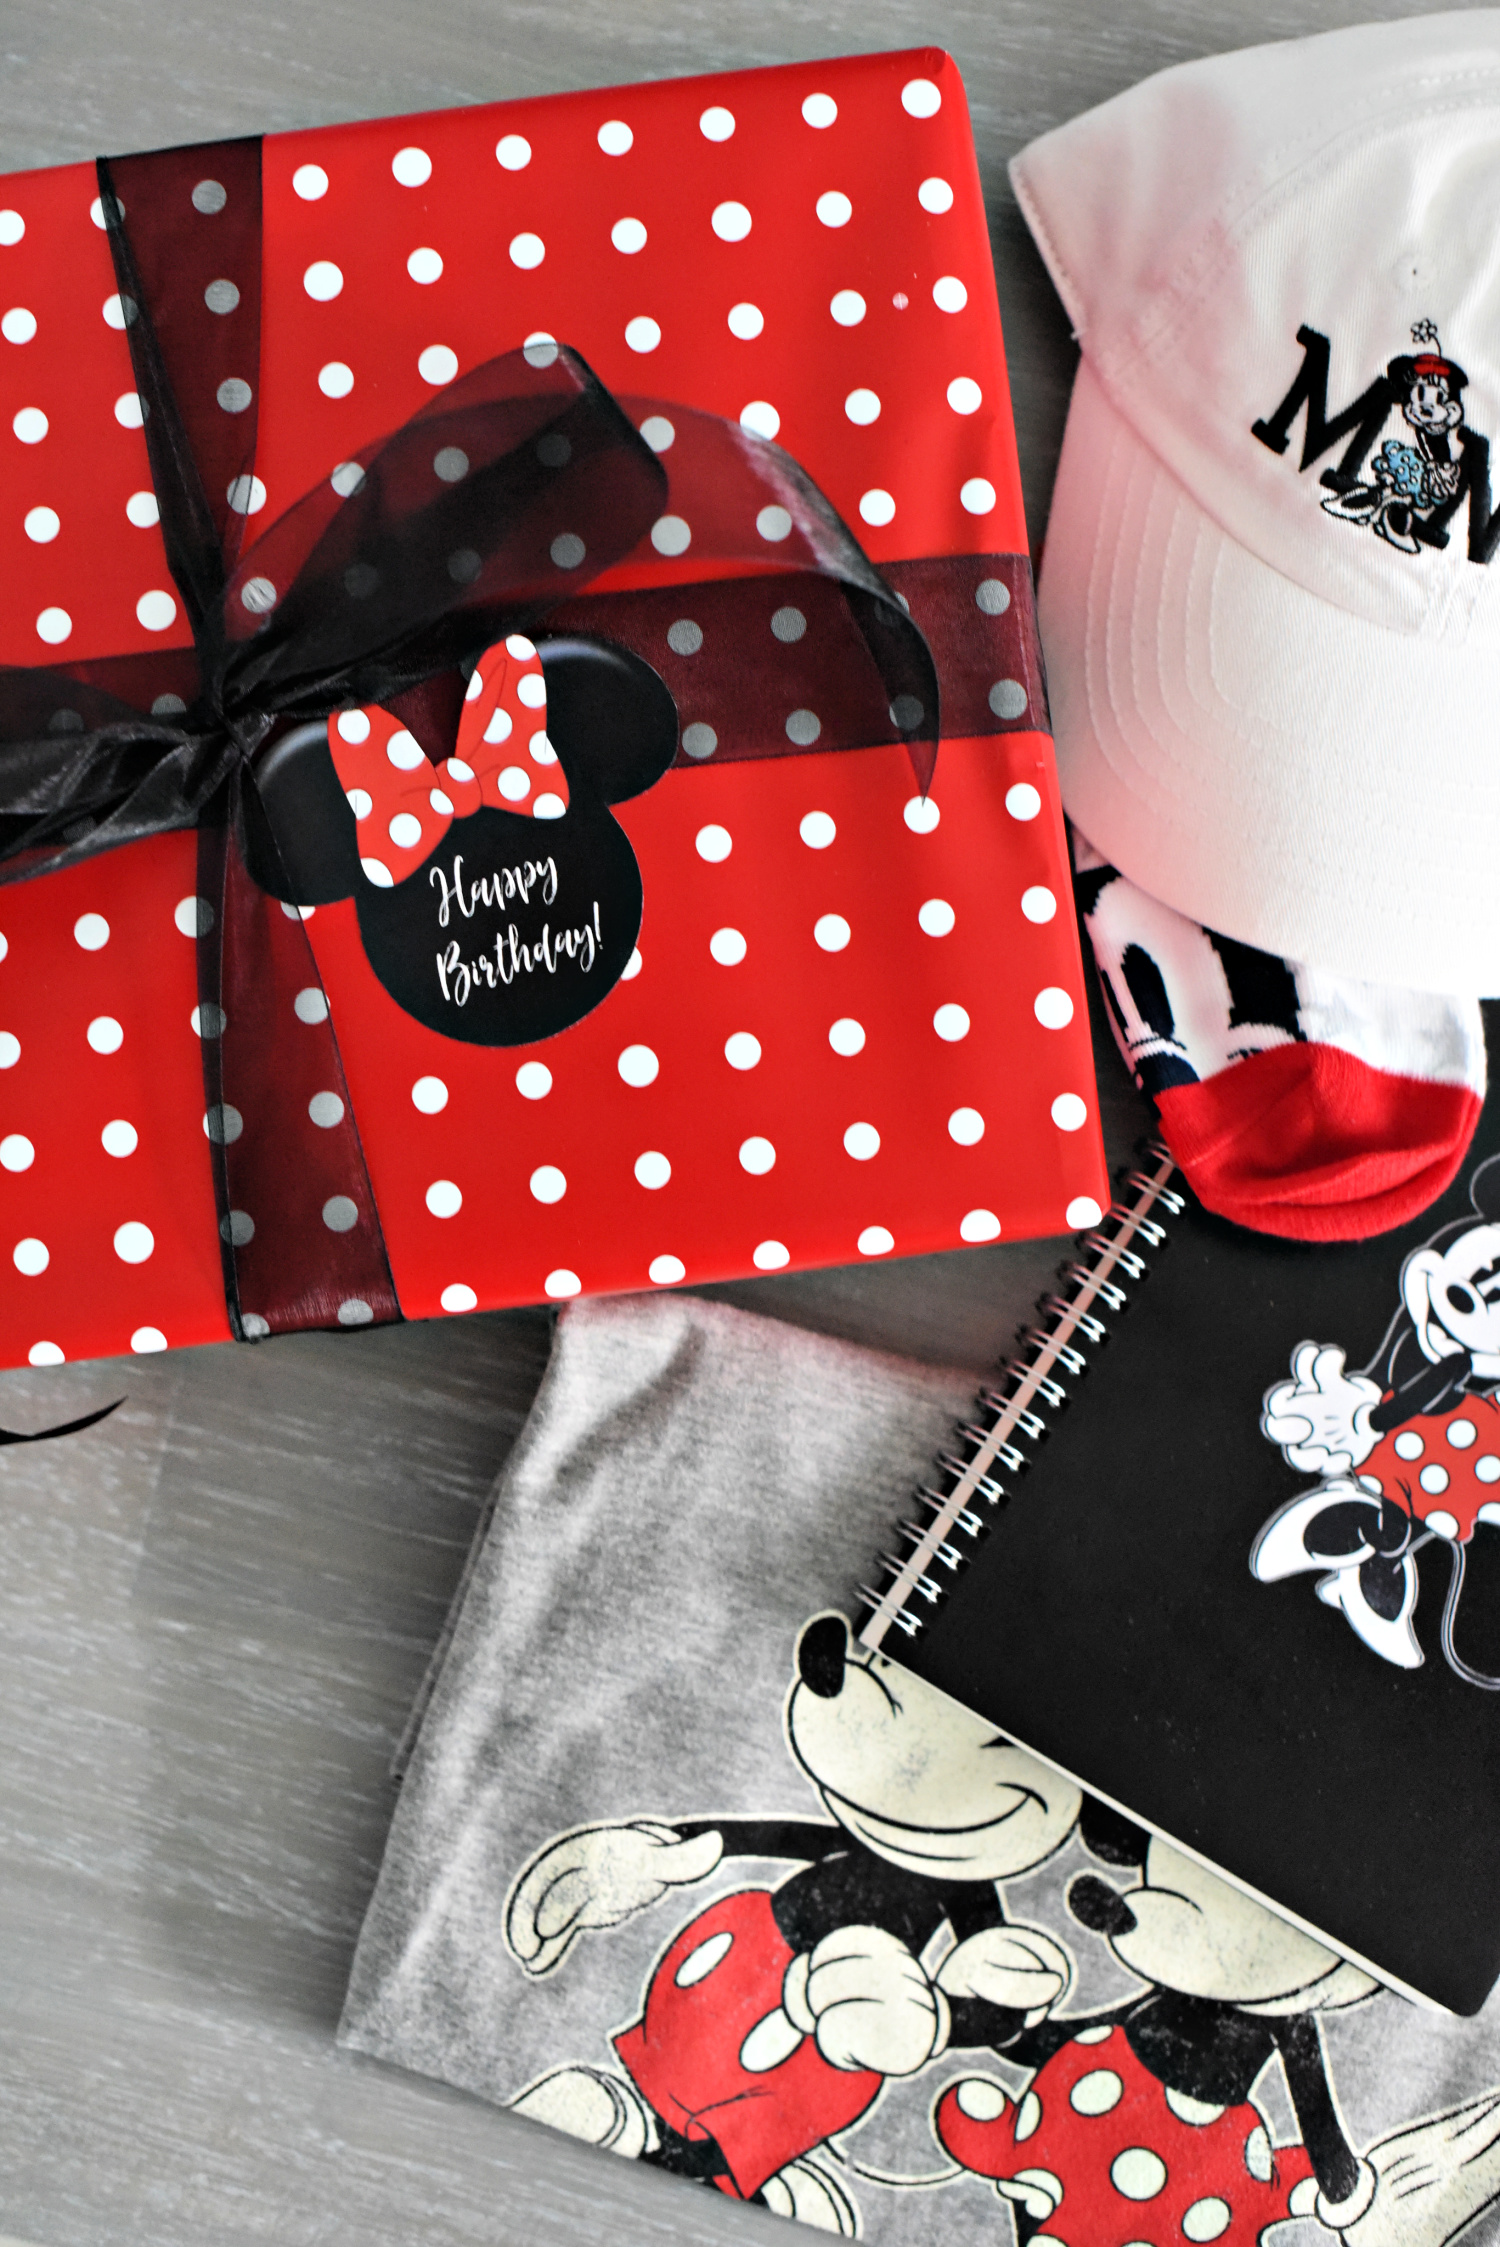 Cute Minnie Mouse Gift for Friends! Got a friend who loves Disney? She will love this Minnie Mouse birthday gift! #minniemouse #birthdaygifts #giftsforfriends #giftideas #disney